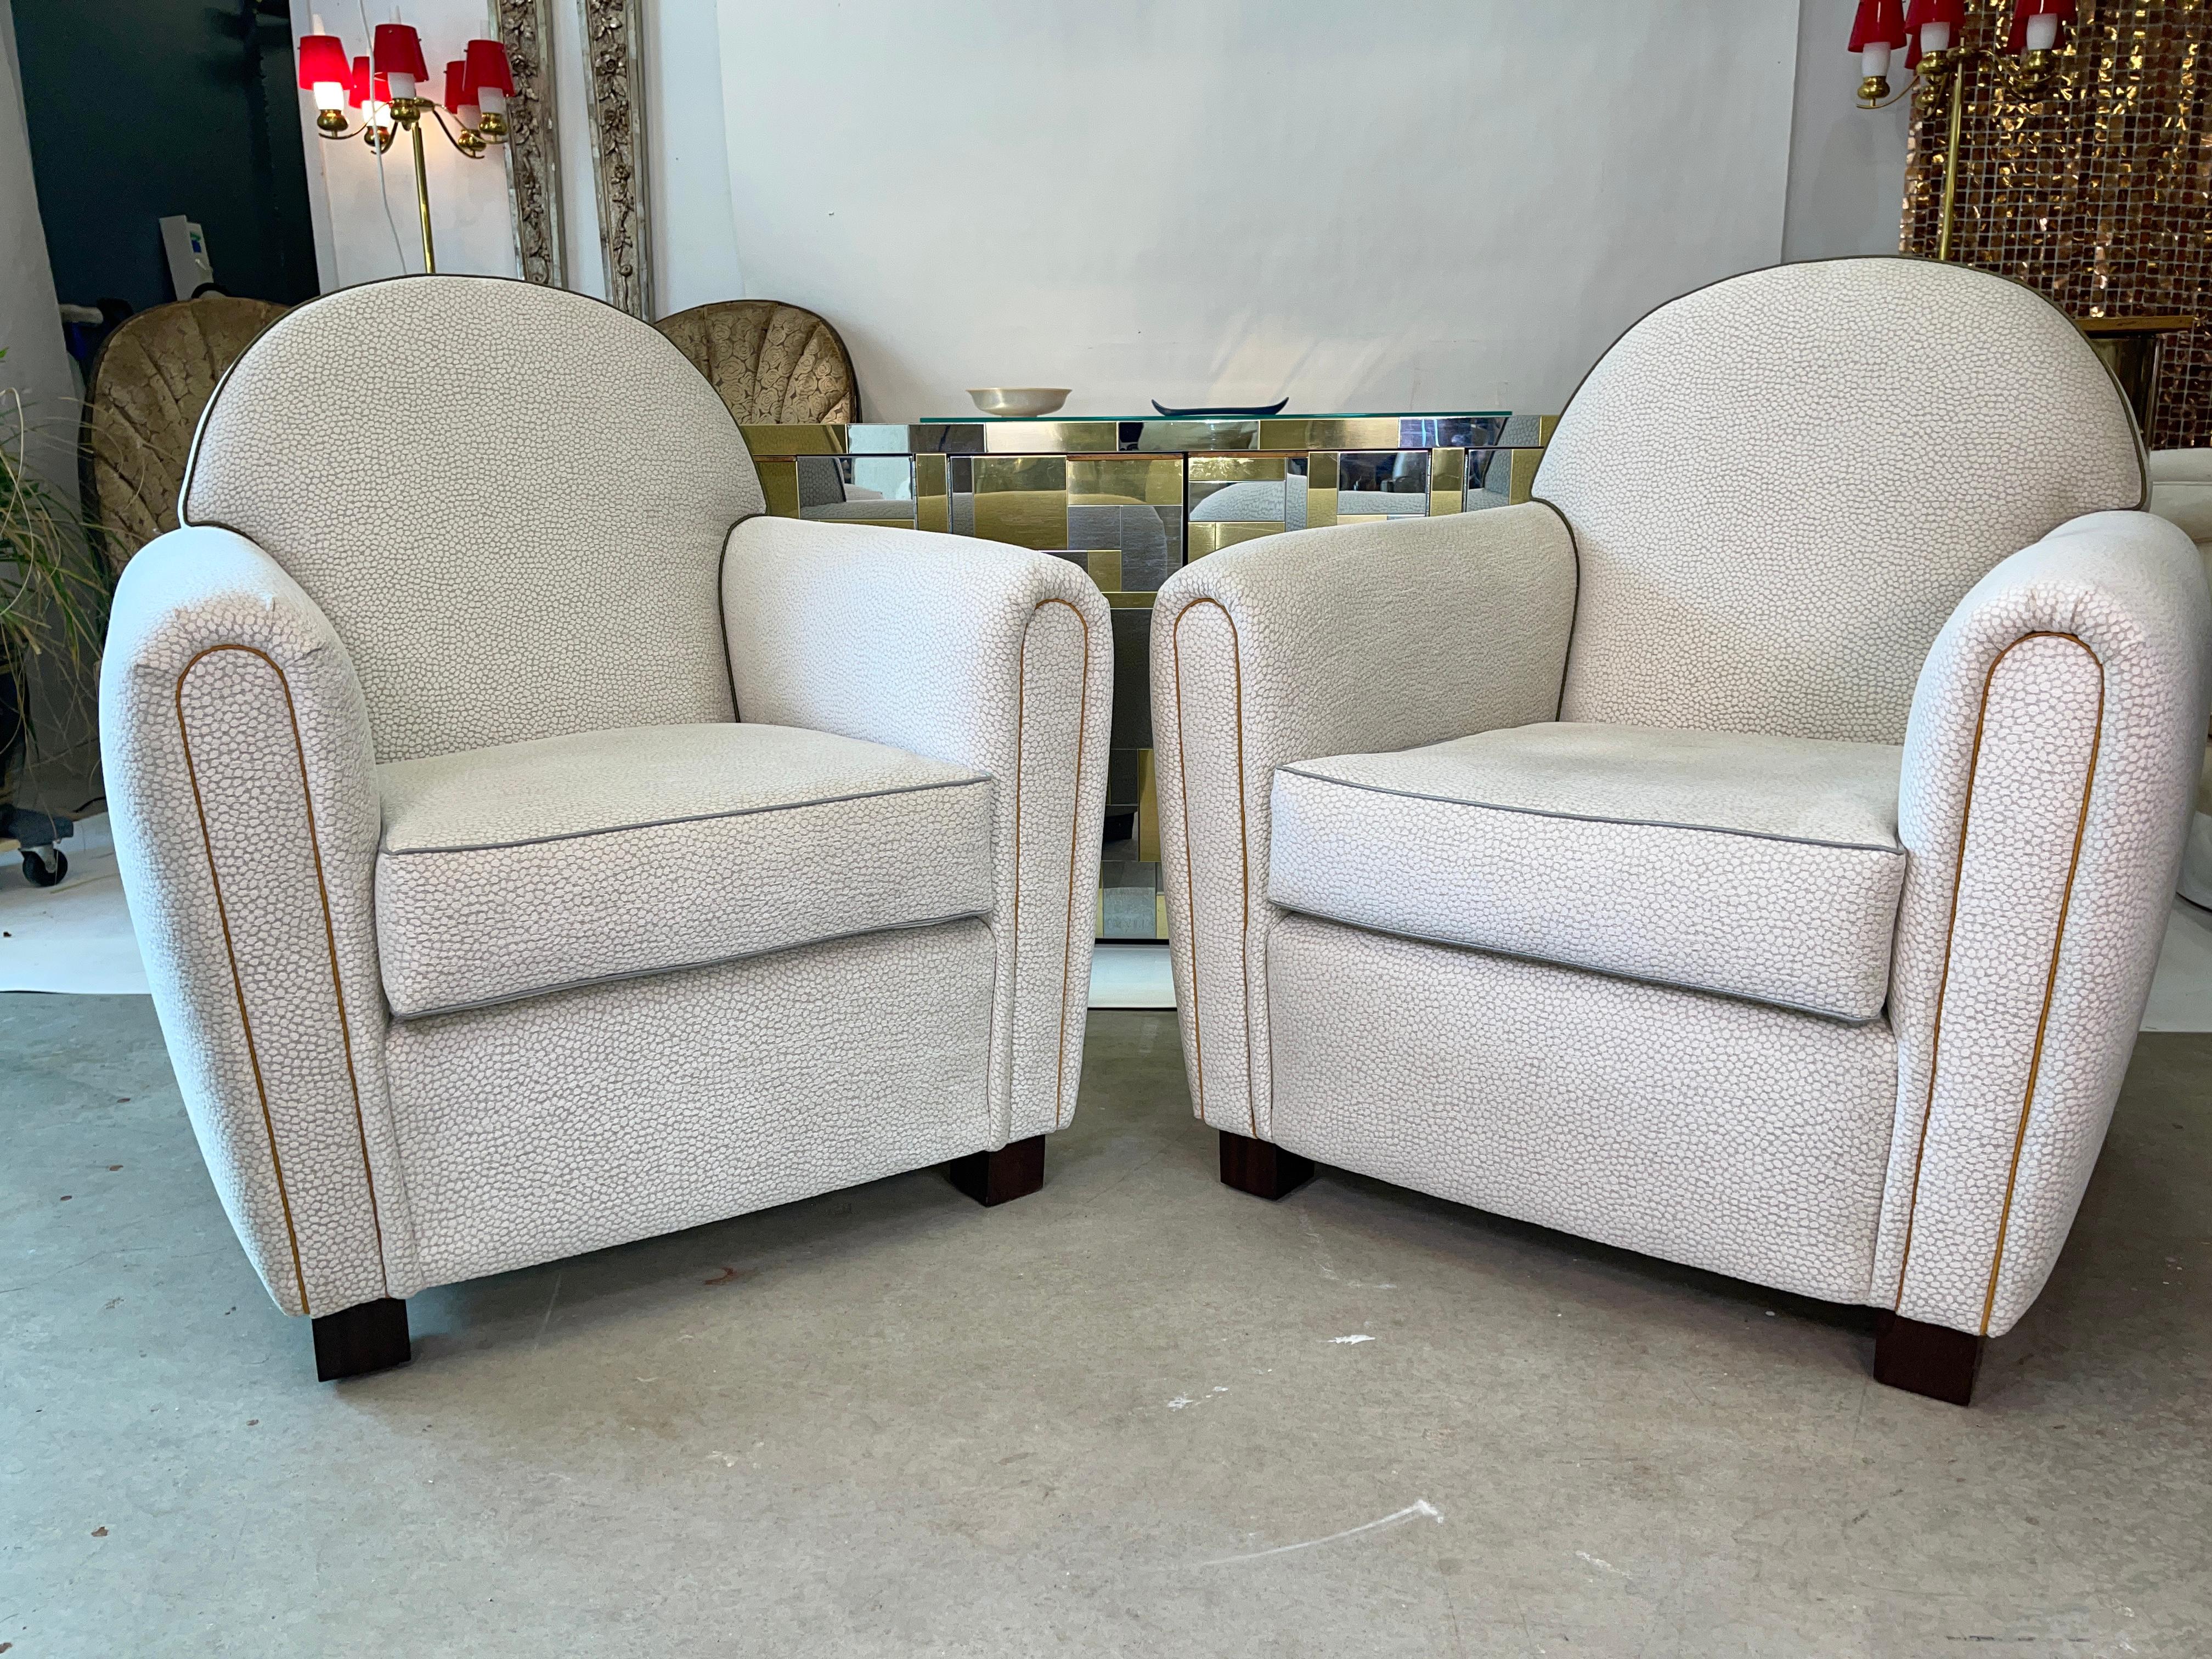 Pair of custom made club chairs inspired by Jean Michel Frank, upholstered in Thibaut fabric with contrasting cording. Tight back with polyester wrapped Ultracel foam core seat cushion, and ebony stained mahogany feet.

 
Fabric: Thibaut “Kali” in